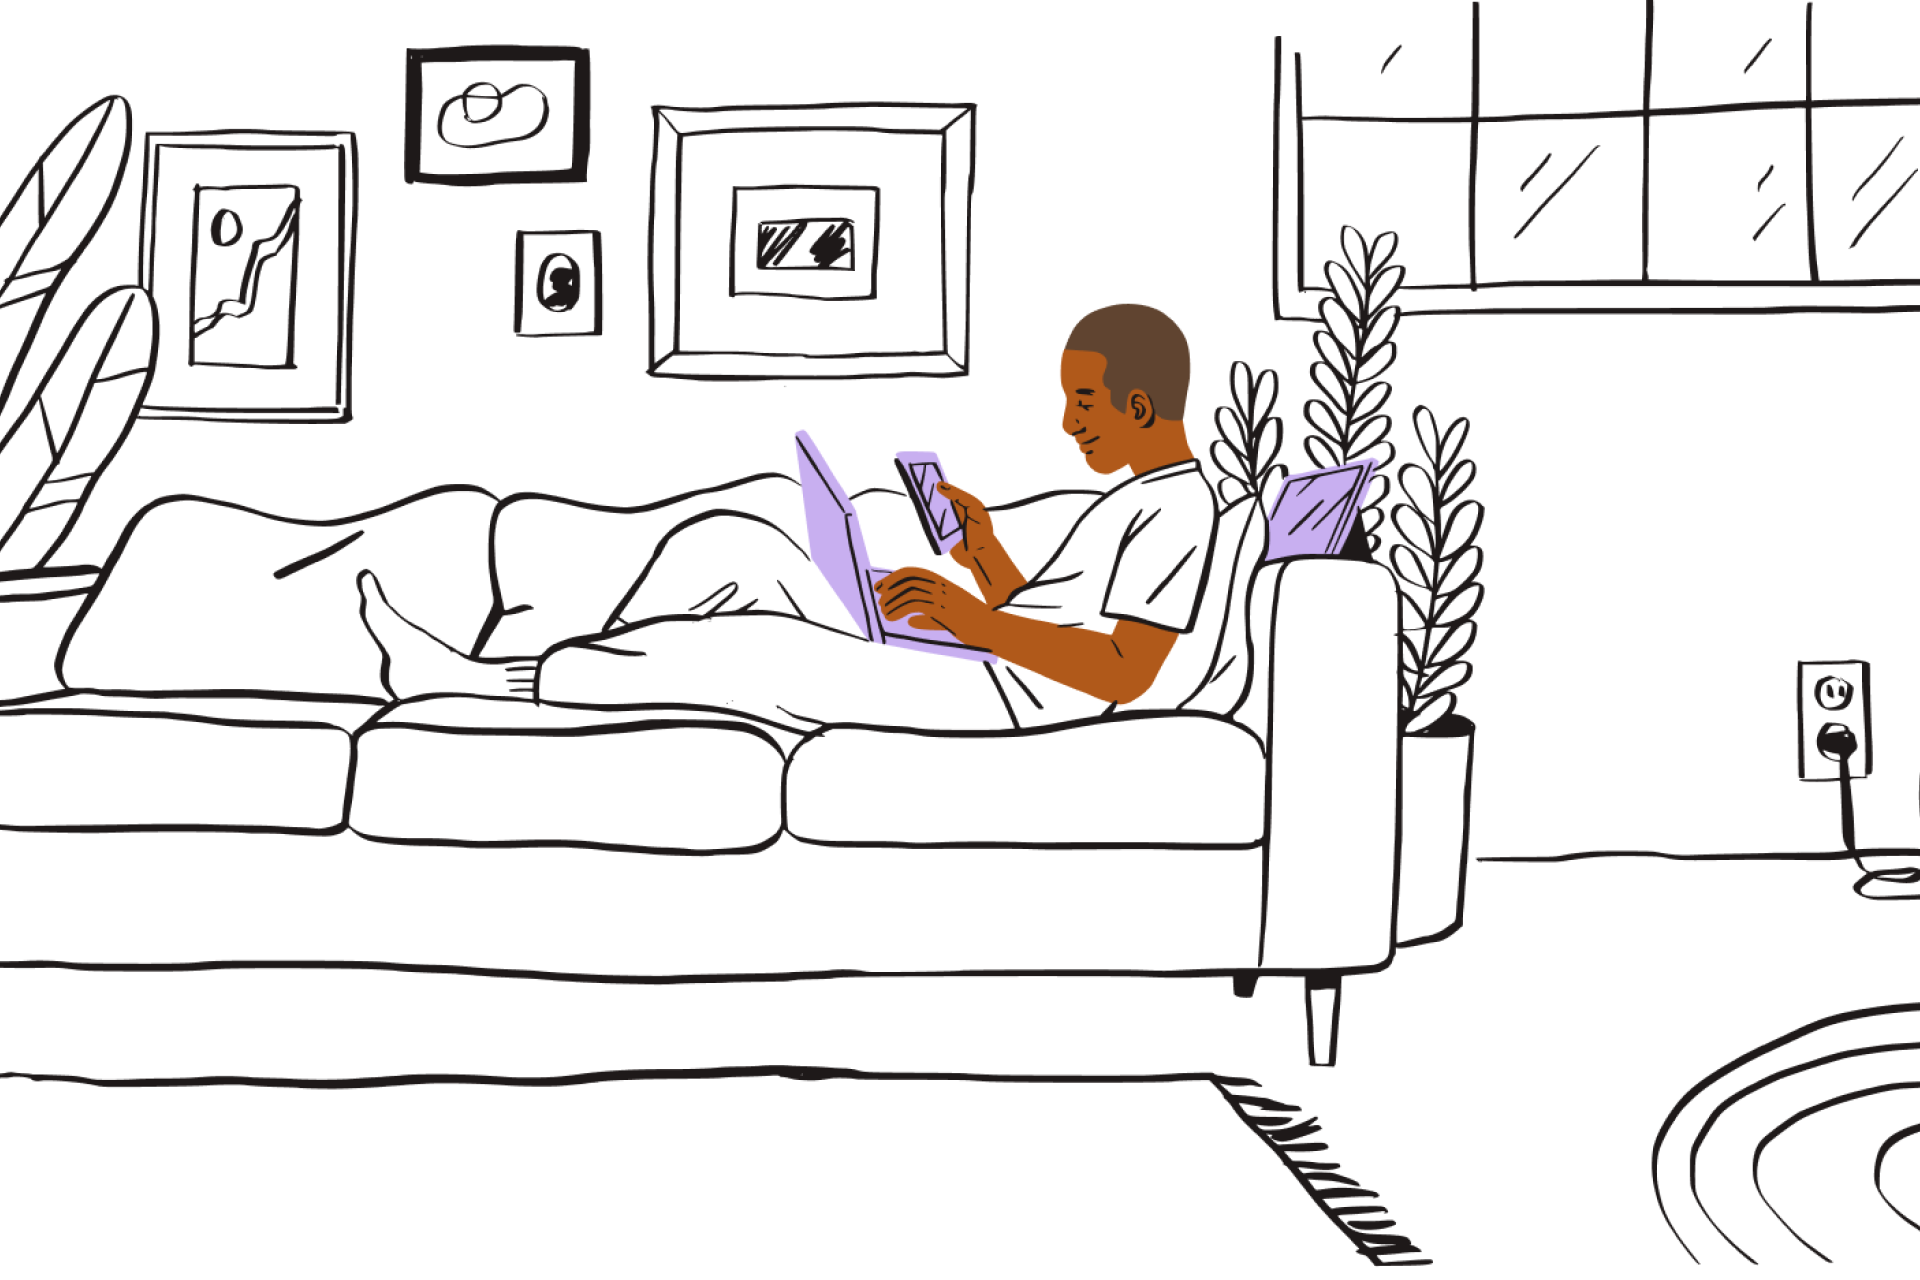 A person lounging on a sofa viewing a PDF on their laptop and mobile device.